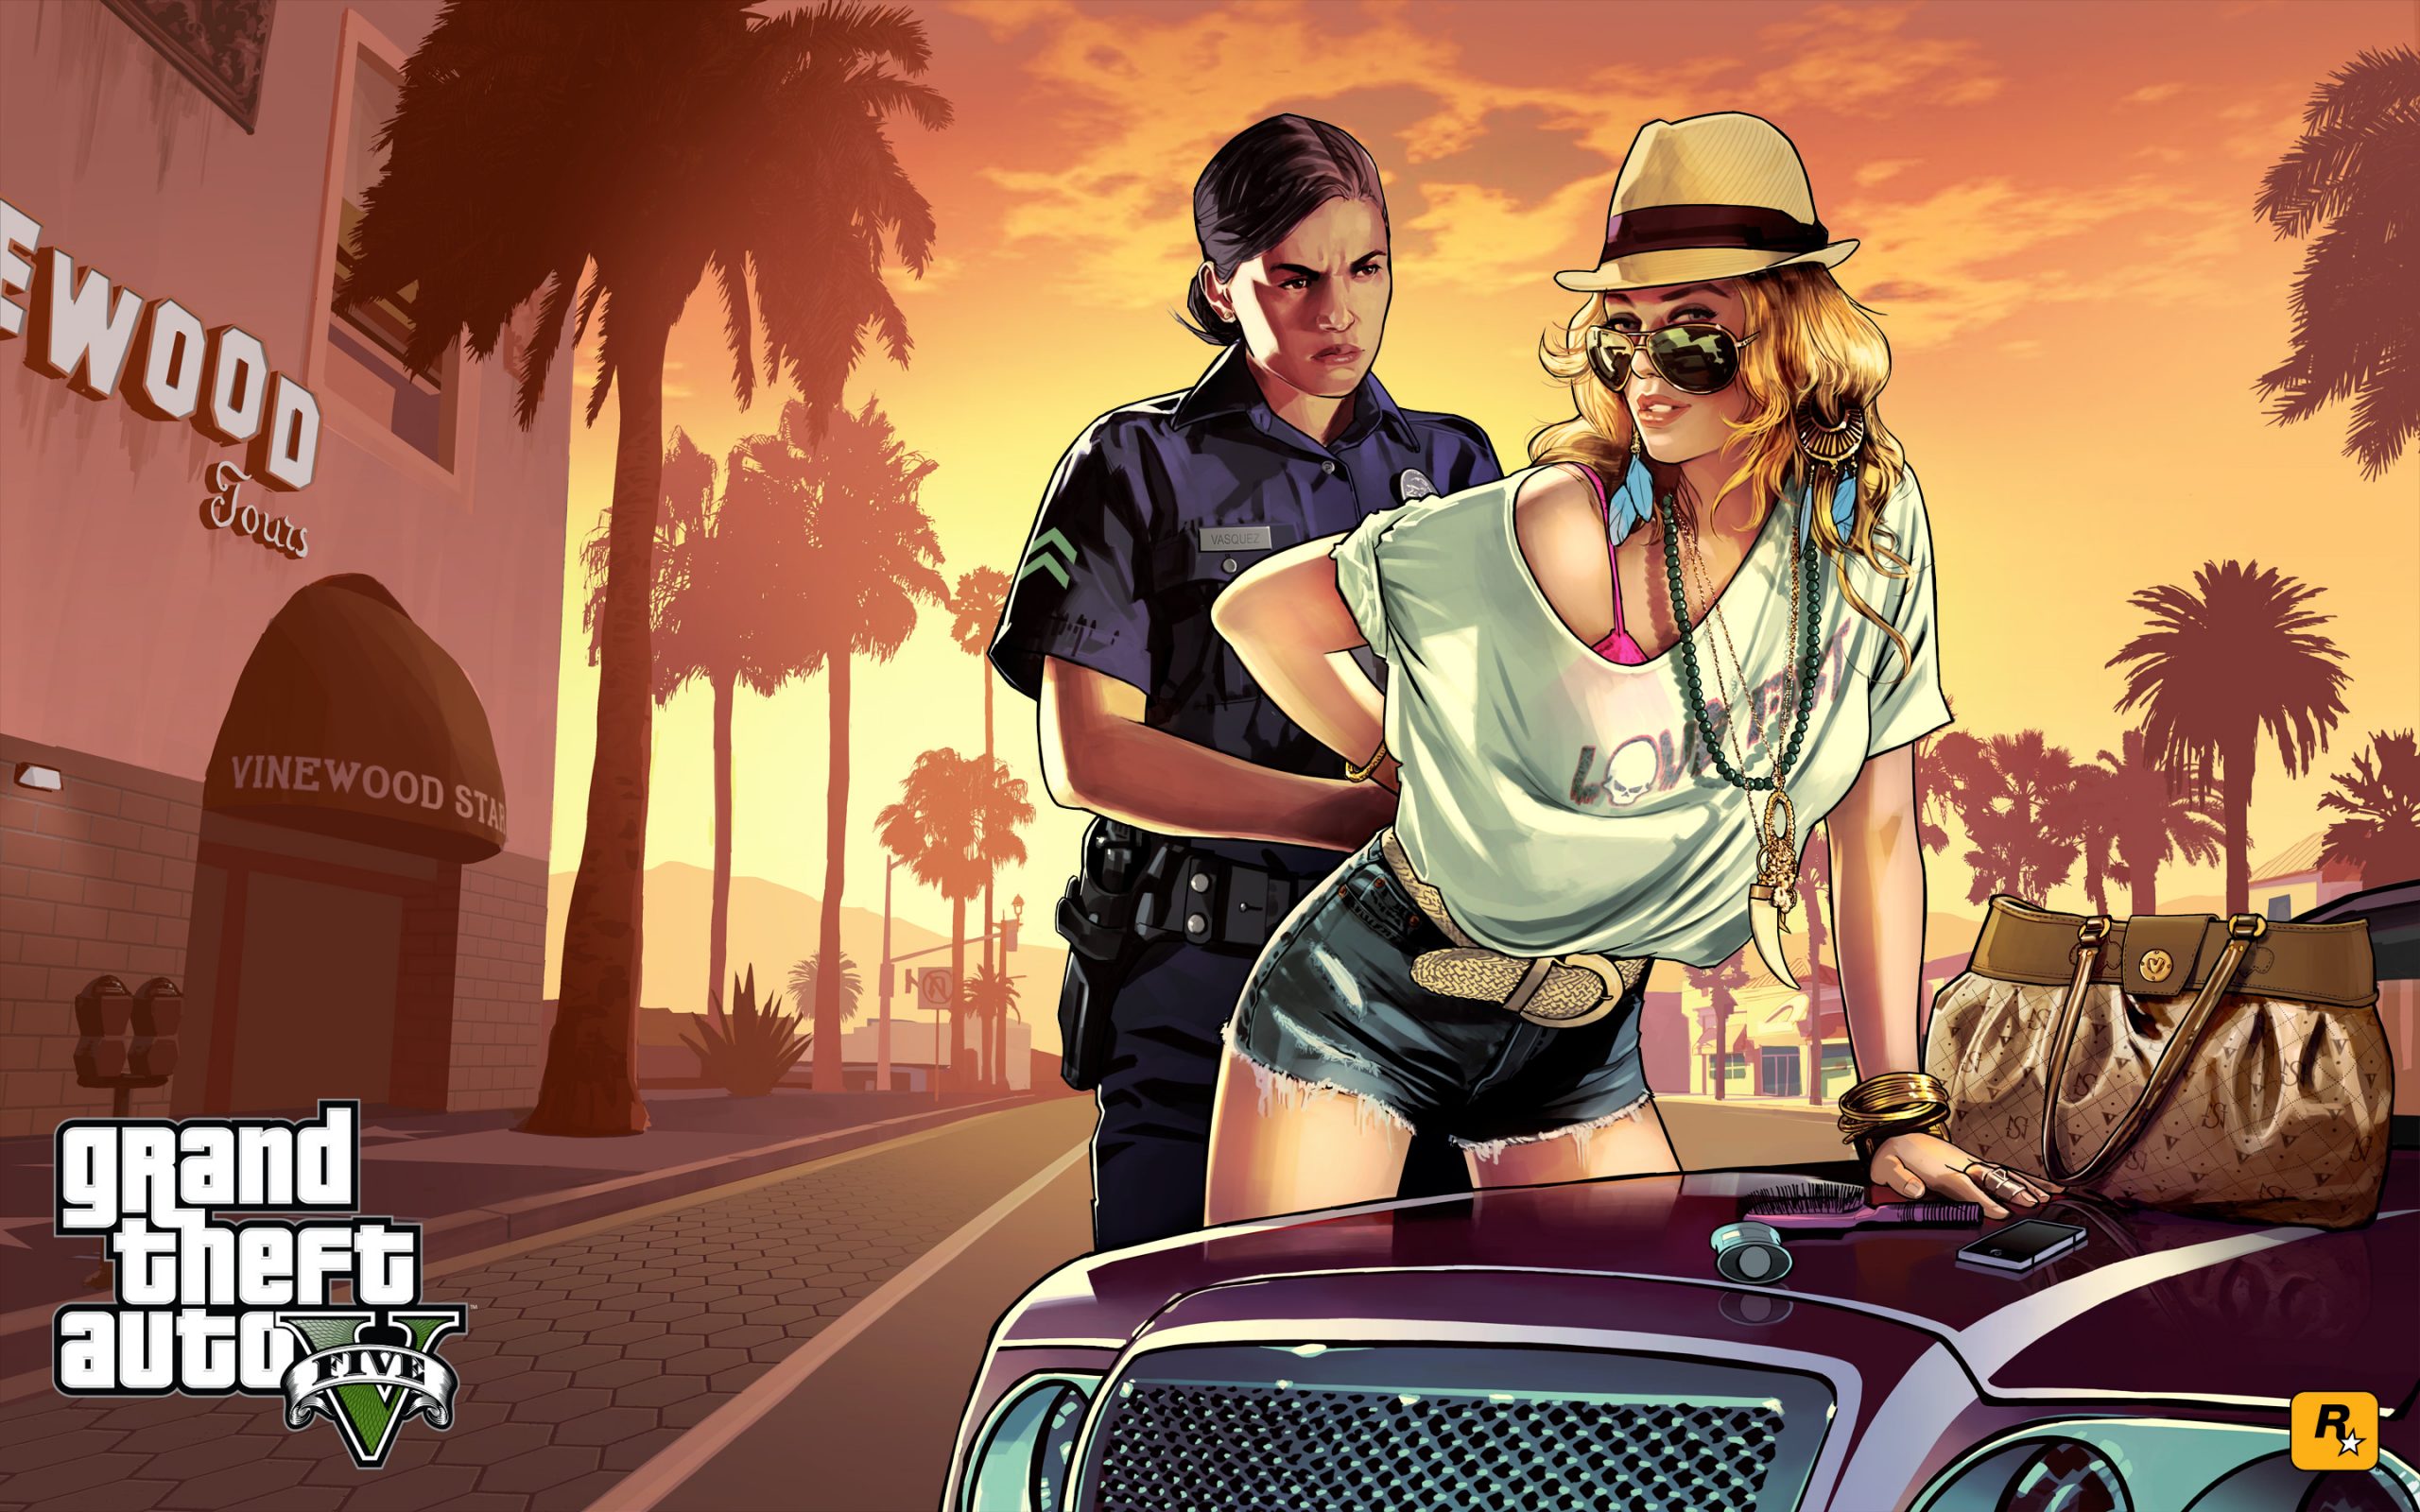 GTA Vice City Cheat Code: PC, Play Station, And Much More